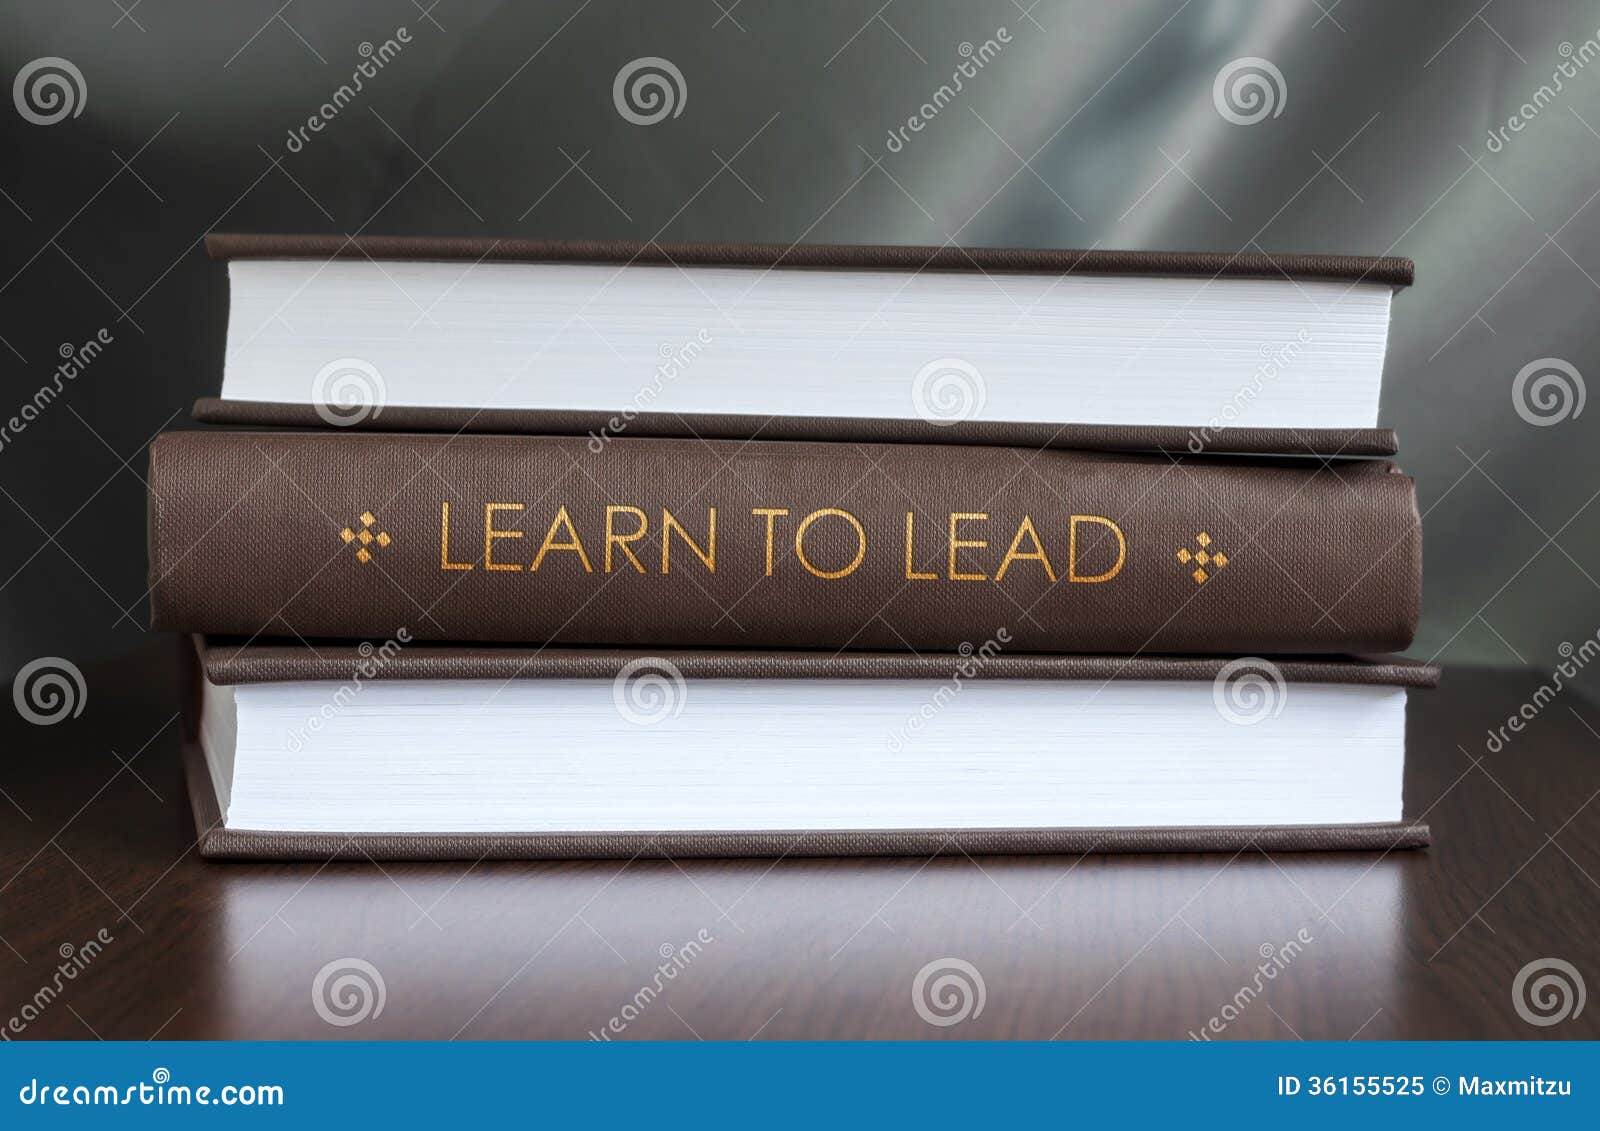 learn to lead book concept.